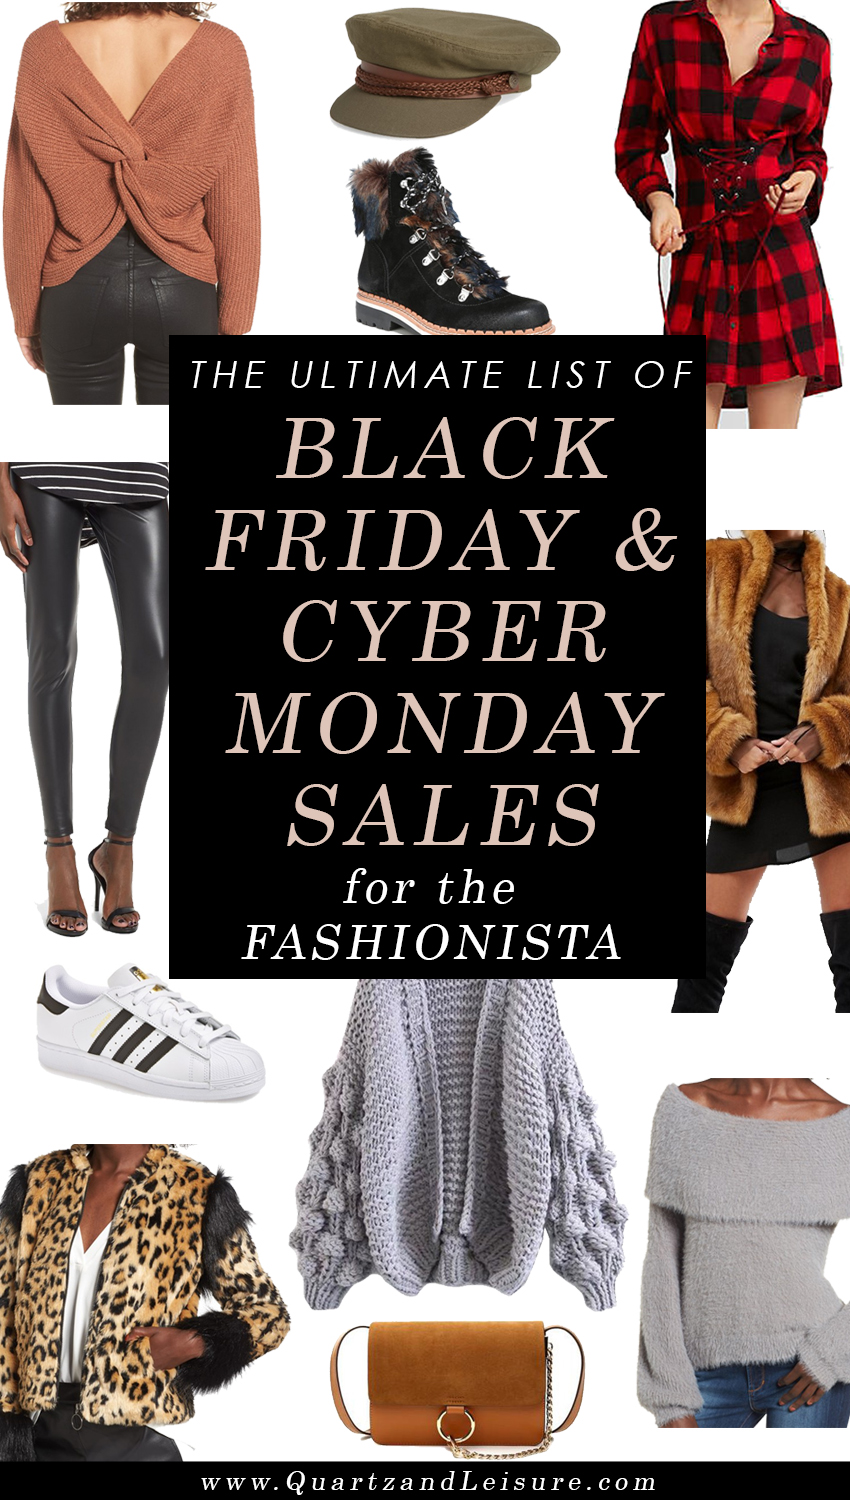 The Ultimate List of Black Friday Sales 2017 - Cyber Monday Sales 2017